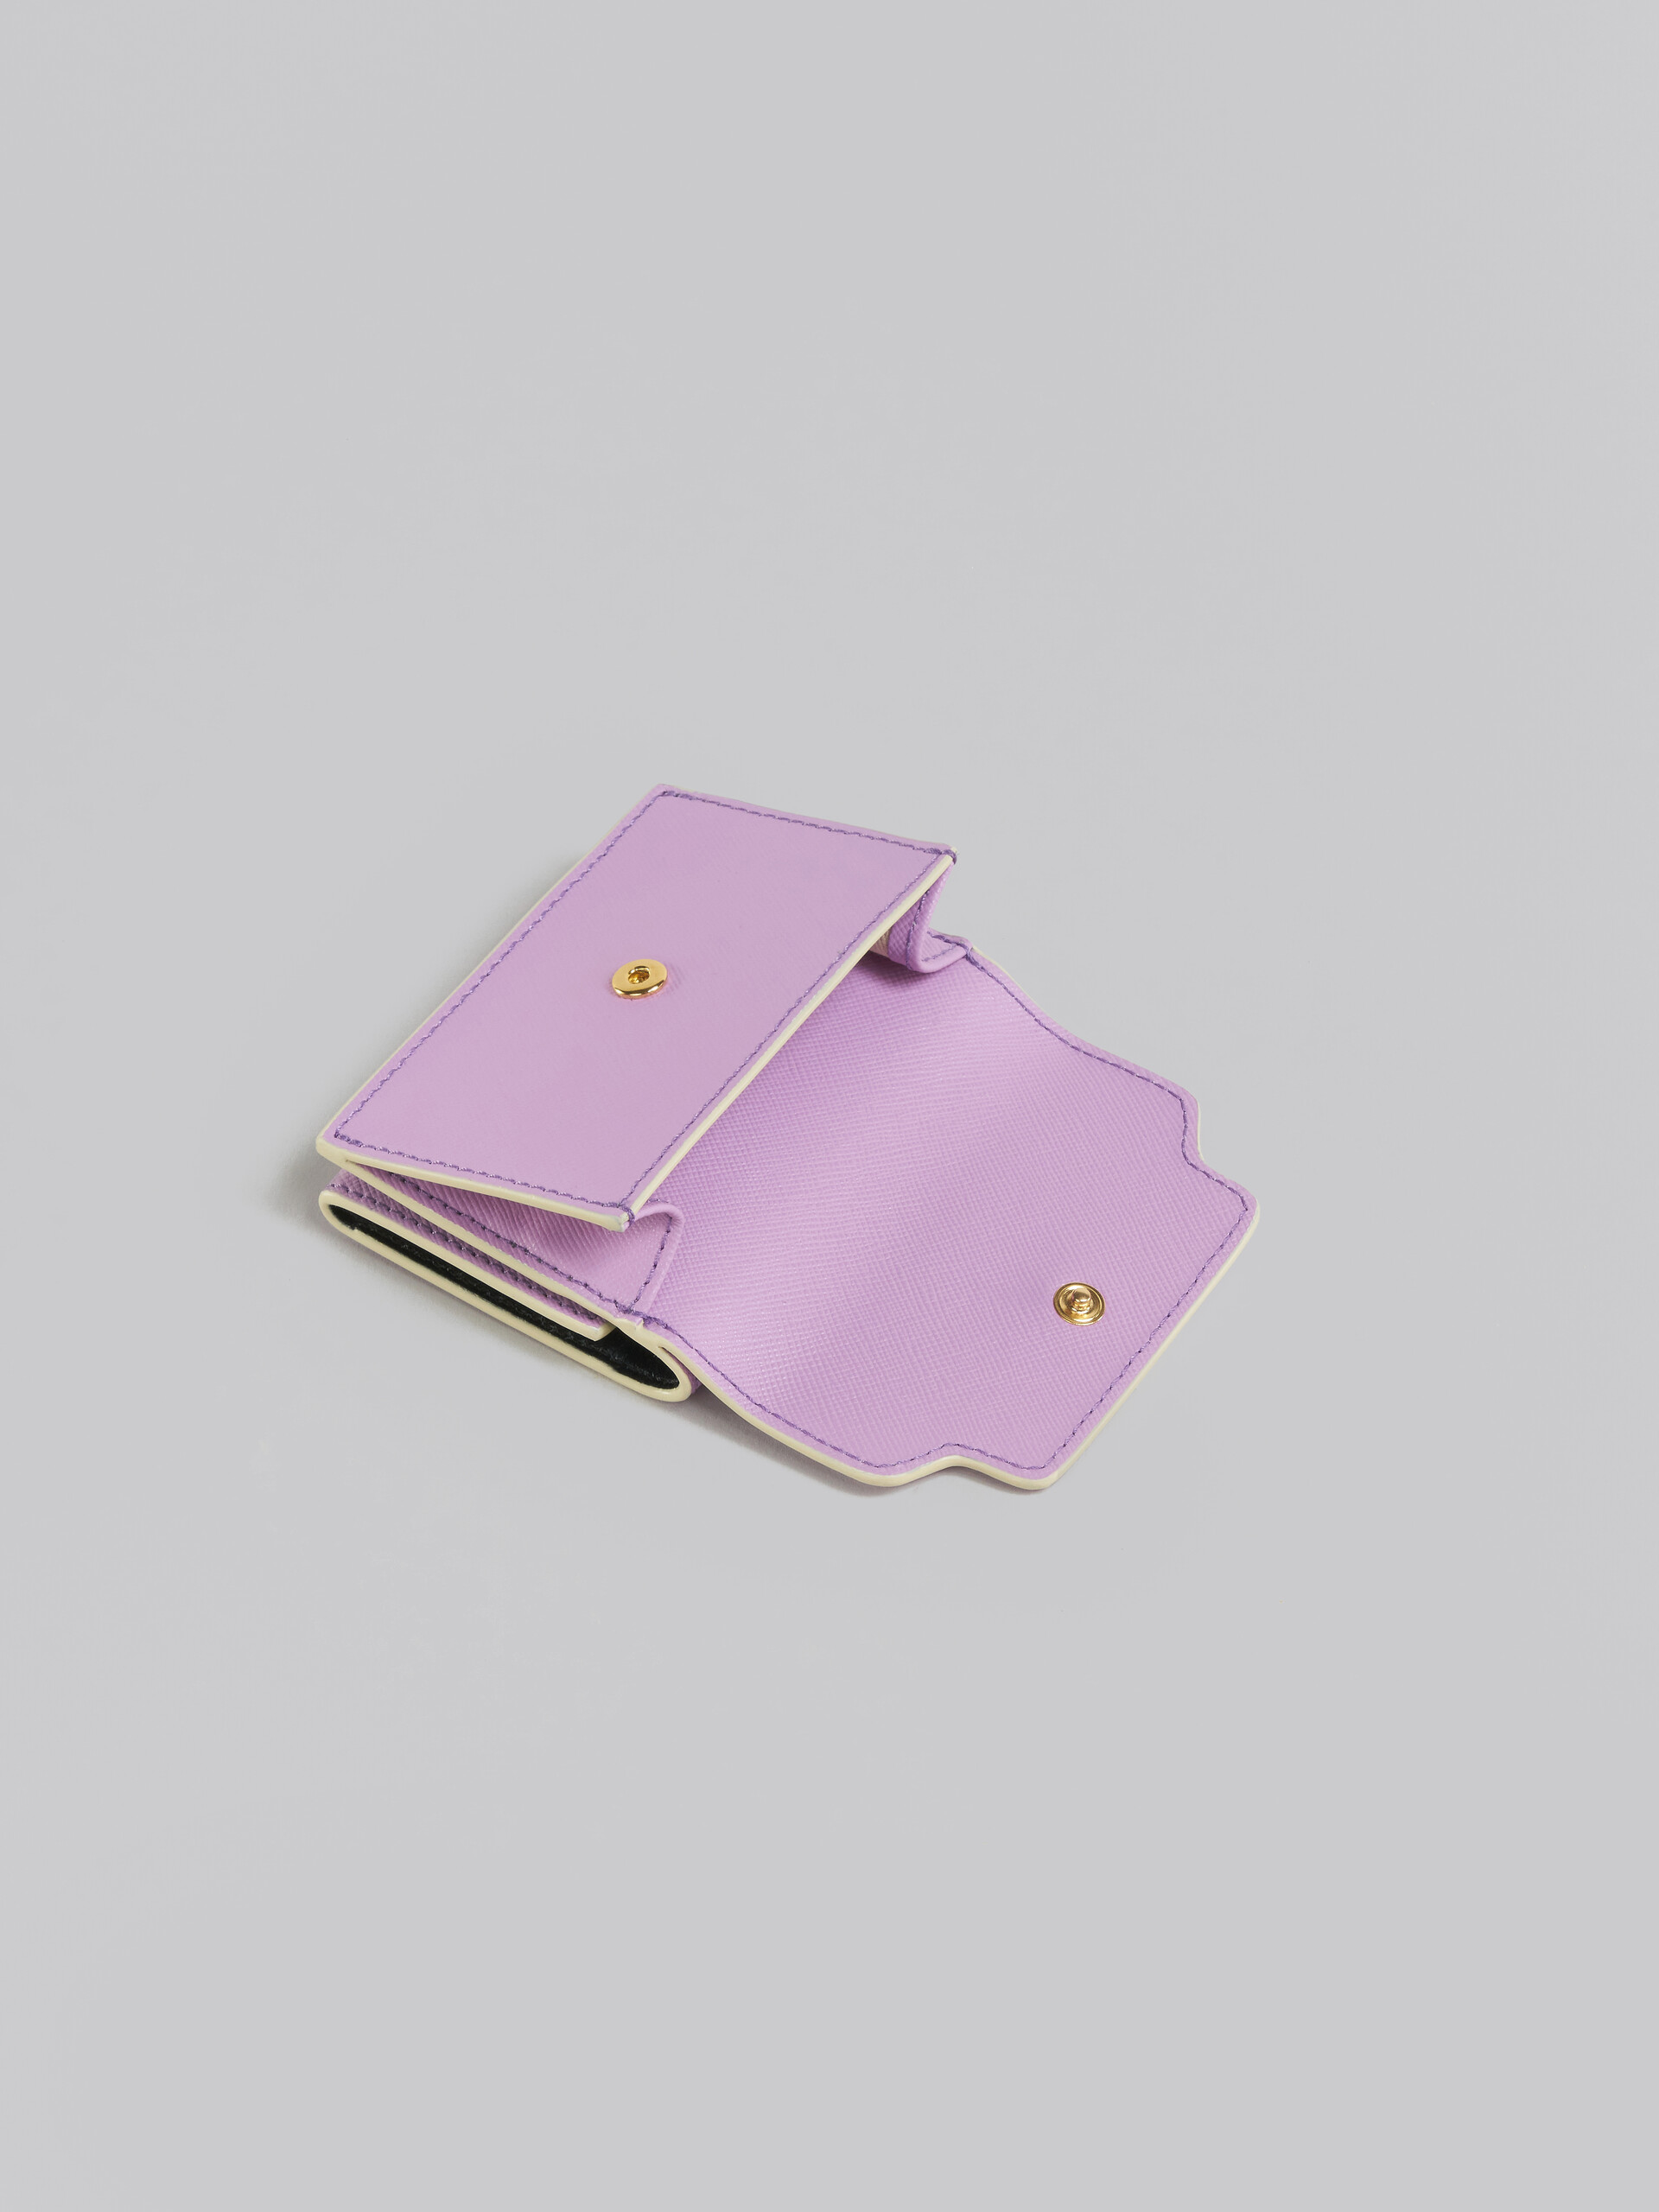 Lilac saffiano leather tri-fold wallet - Wallets - Image 5